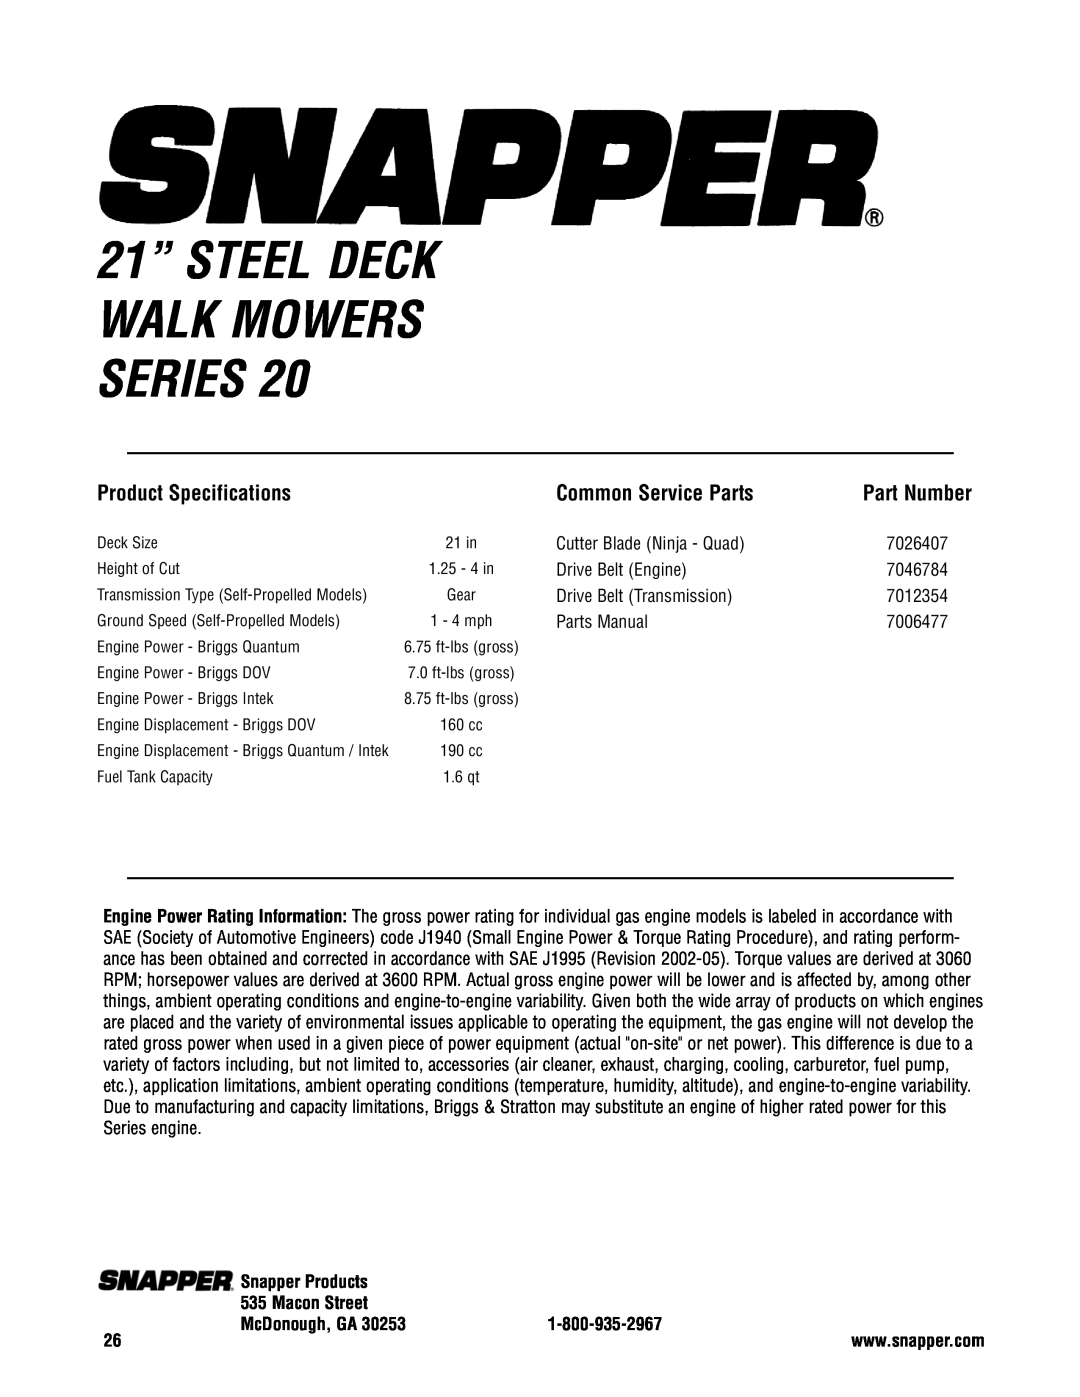 Snapper RP2187520BV (7800425) Product Specifications, Common Service Parts, 21” STEEL DECK WALK MOWERS SERIES, Part Number 